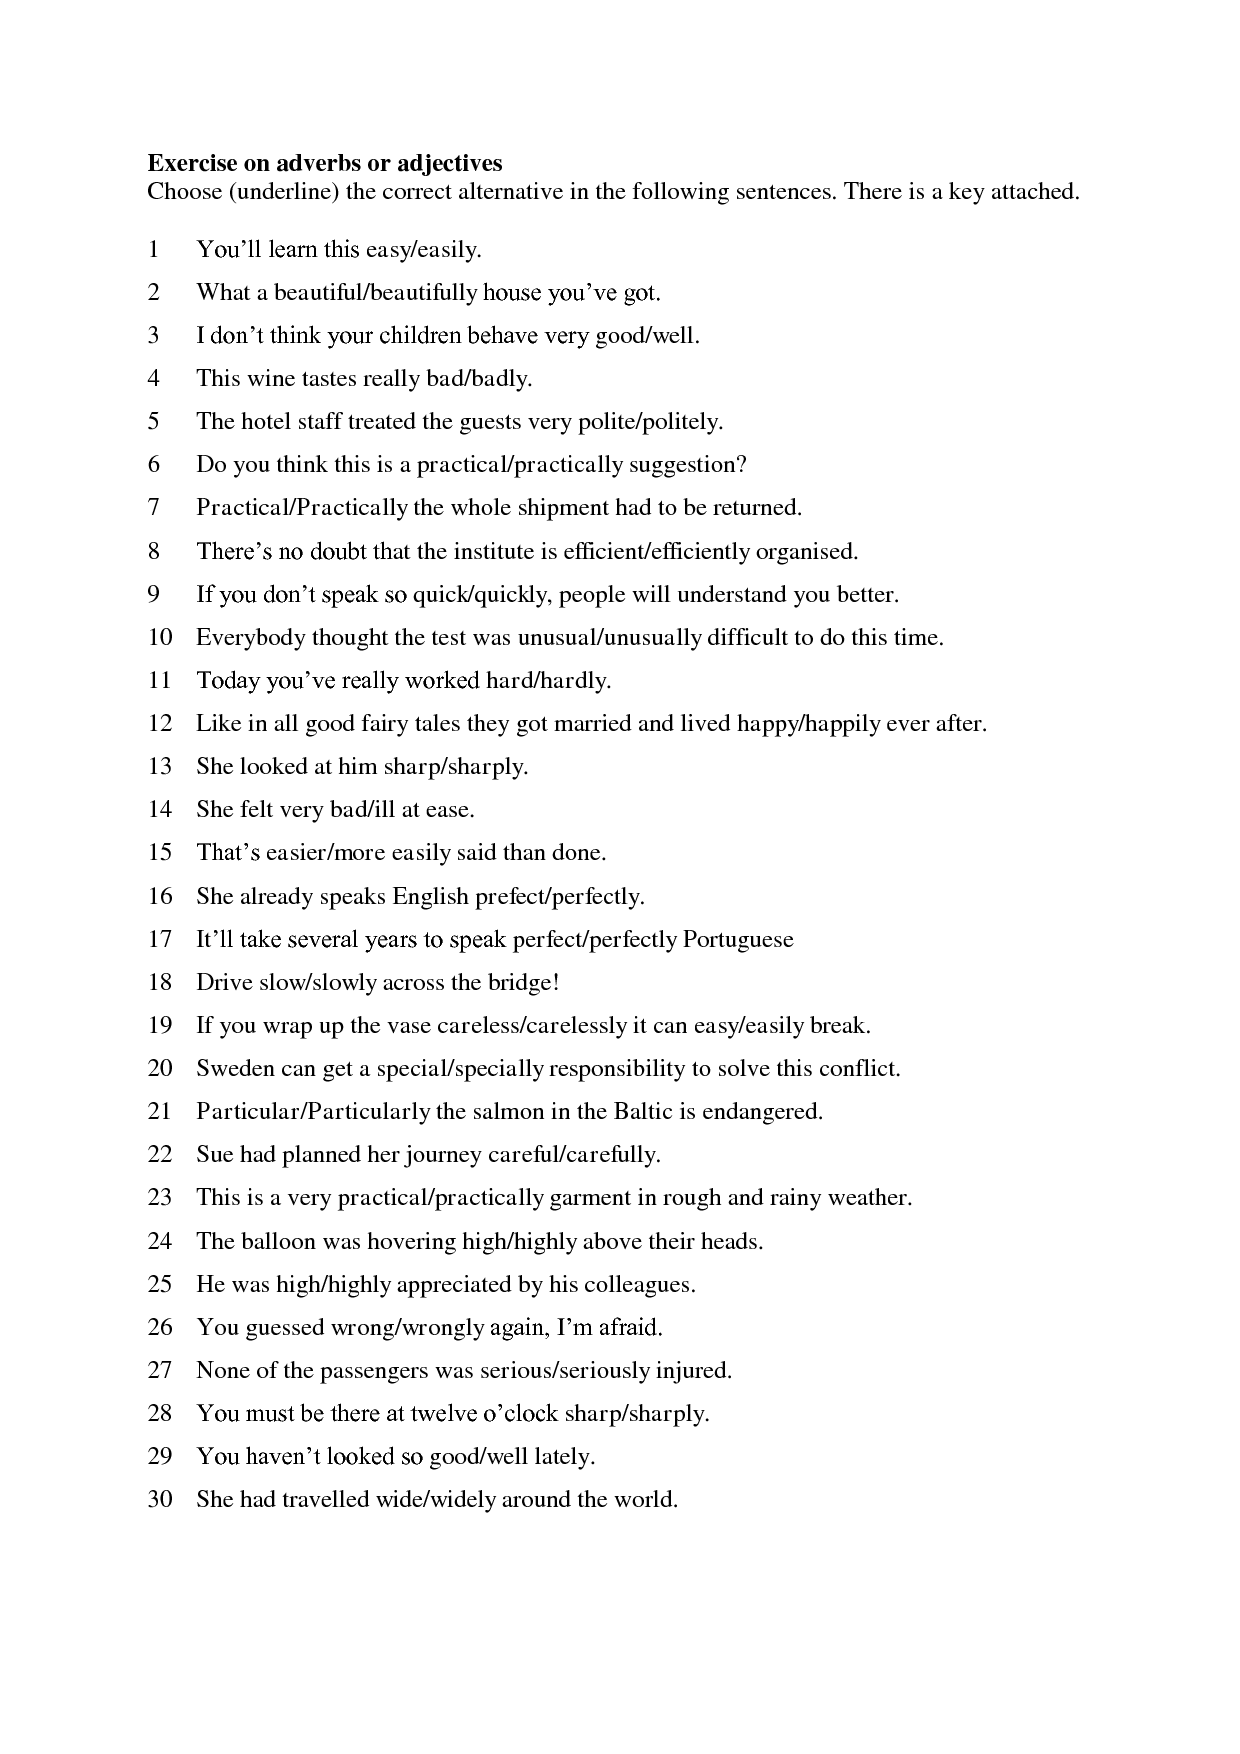 quiz-worksheet-using-adjectival-adverbial-phrases-study